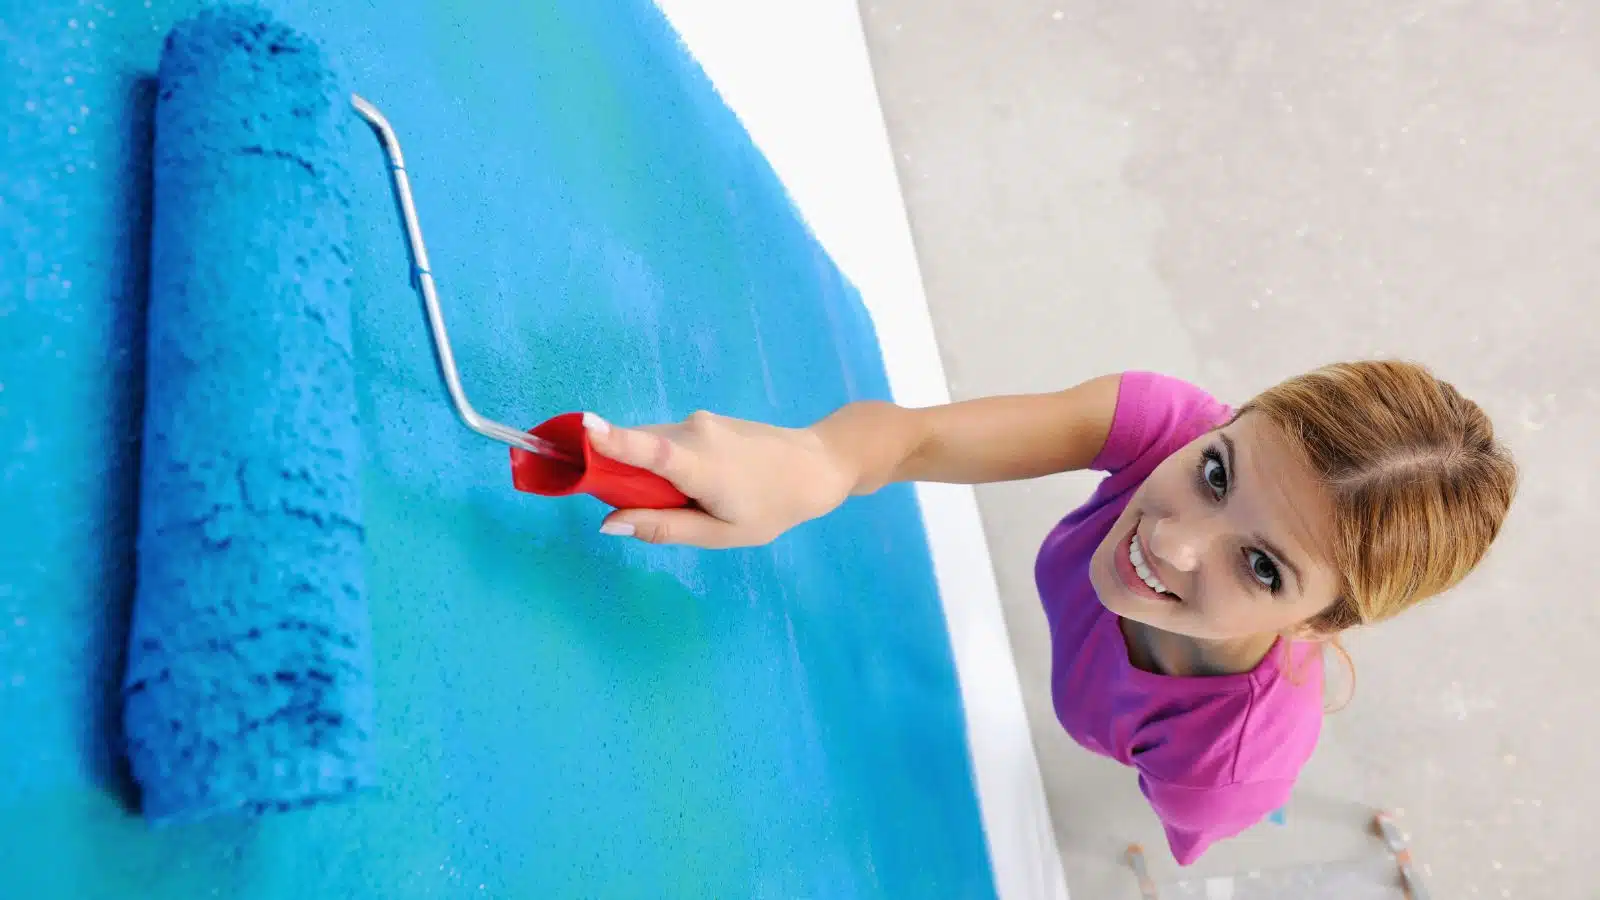 overhead angle of a woman painting a wall bright blue